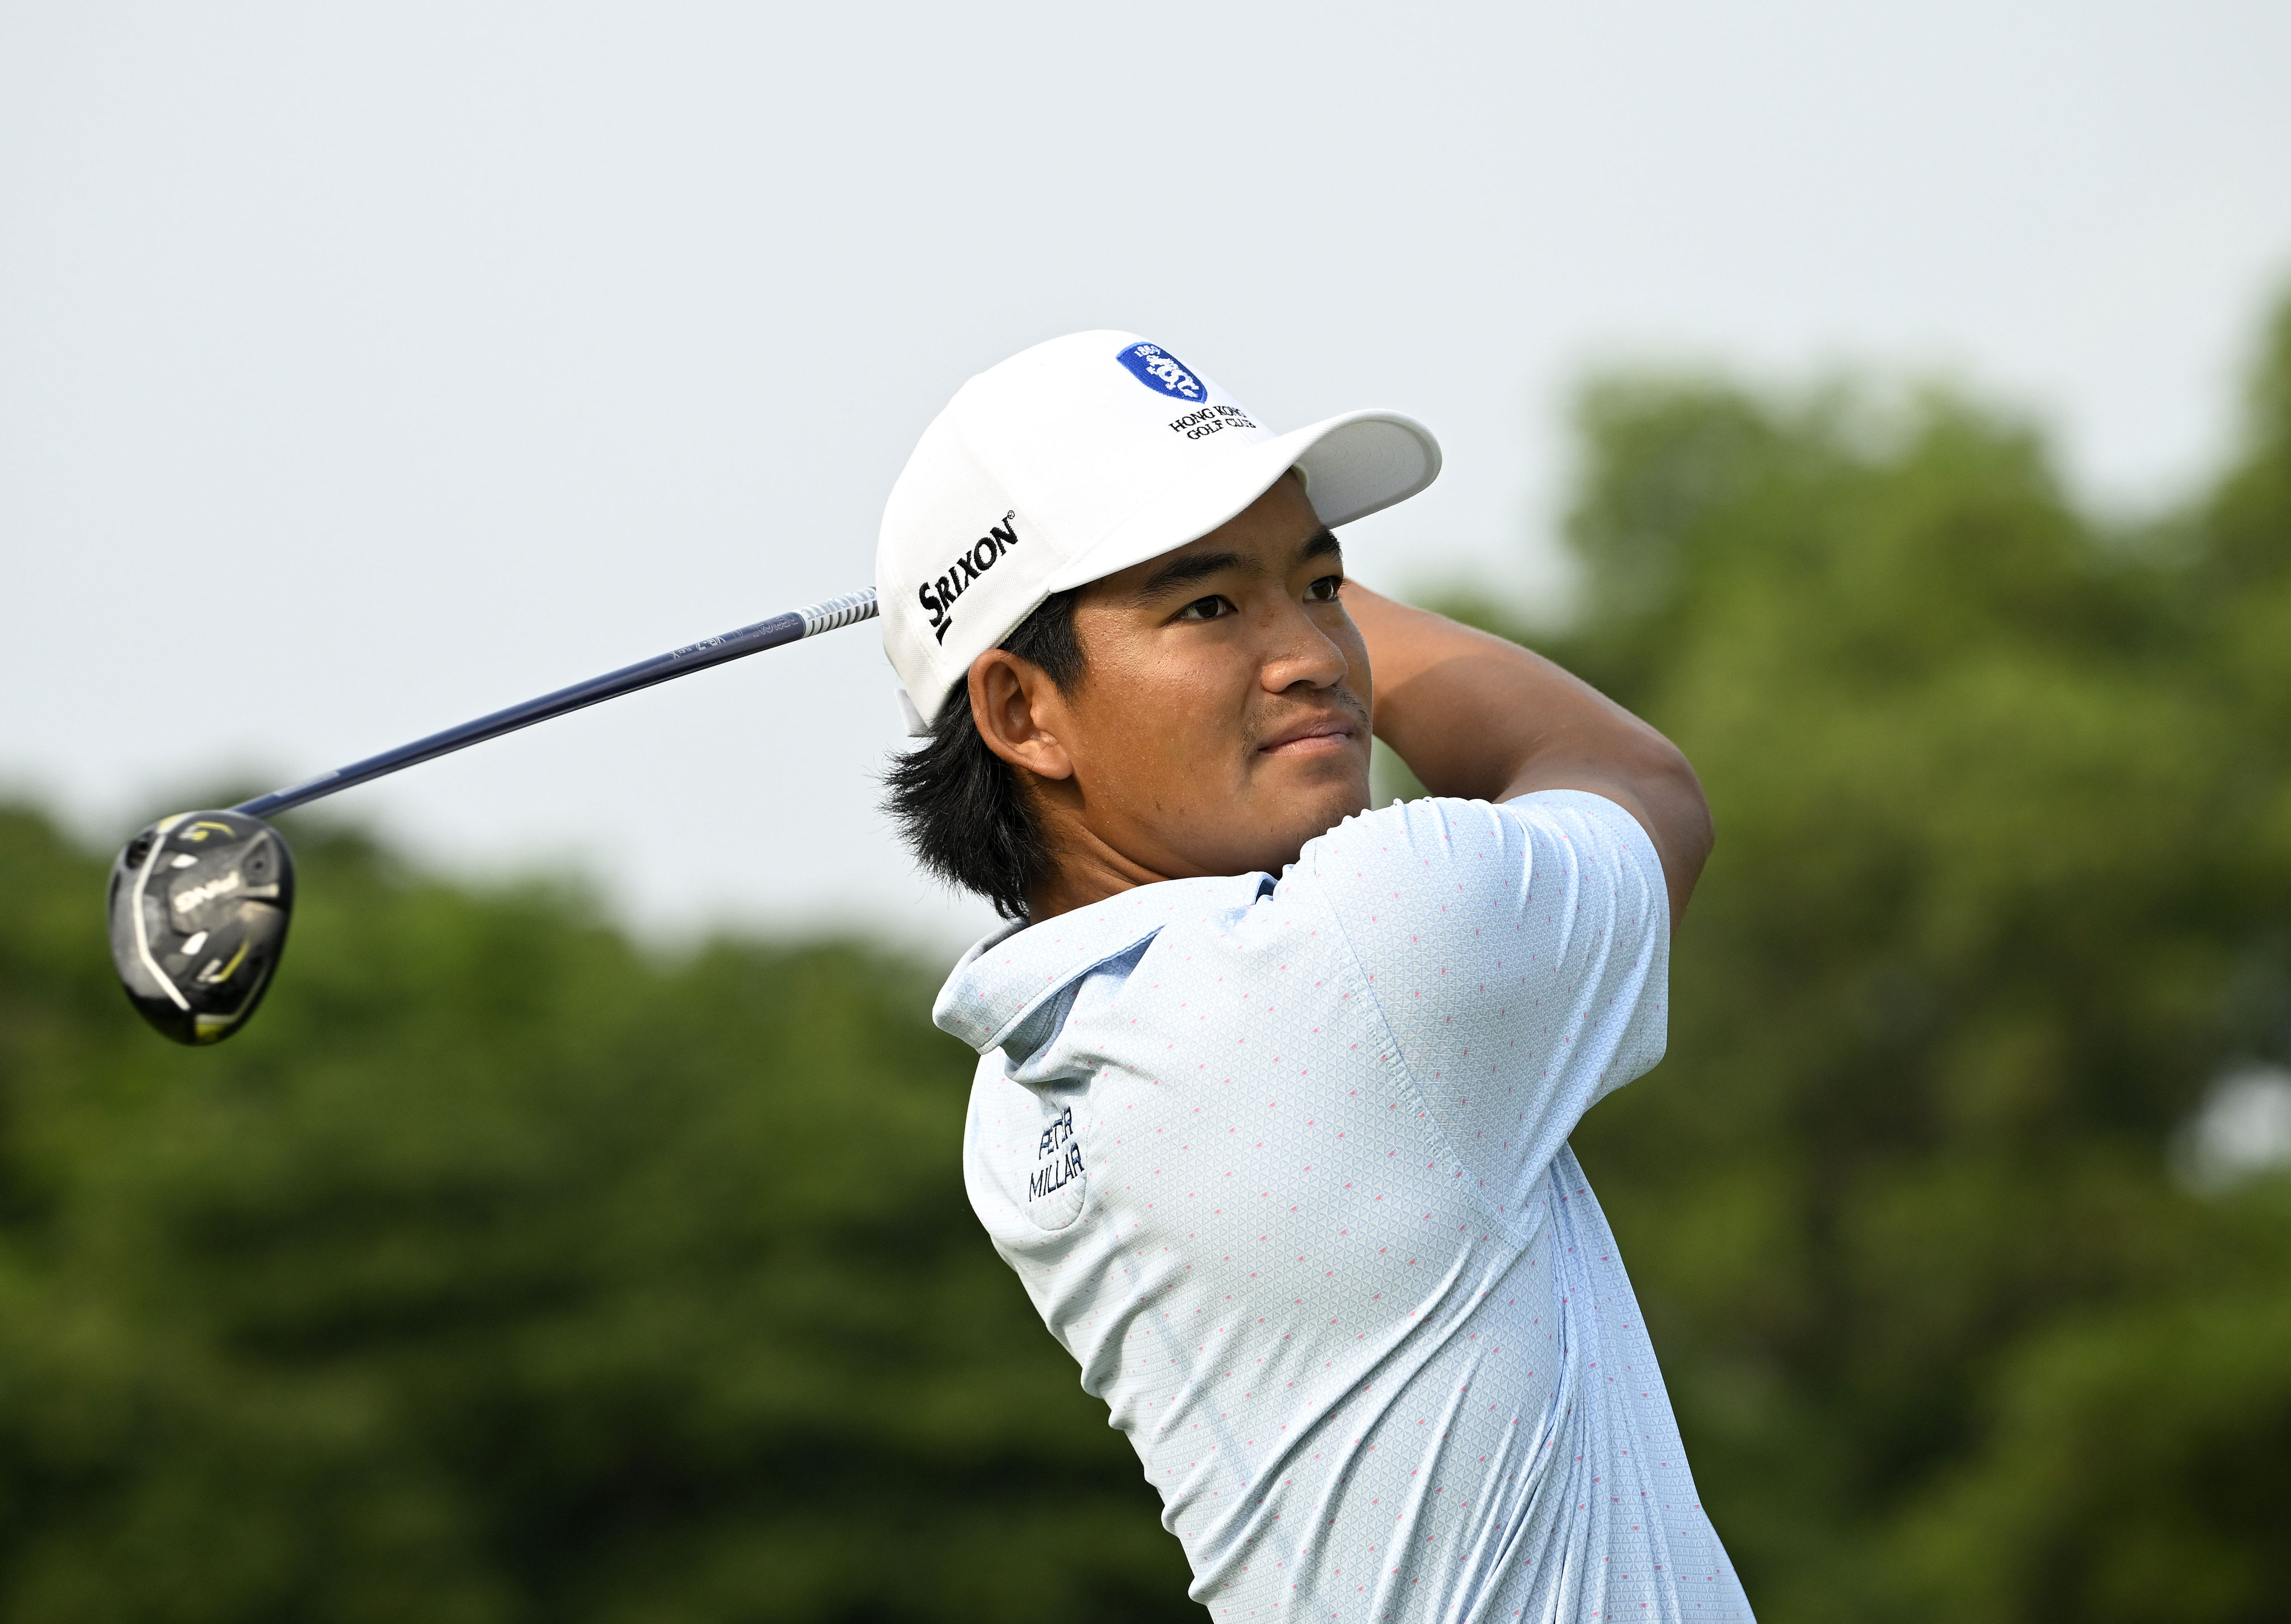 Taichi Kho has a shot at finishing inside the top 32, bringing an opportunity for potential LIV Golf promotions. Photo: Asian Tour.